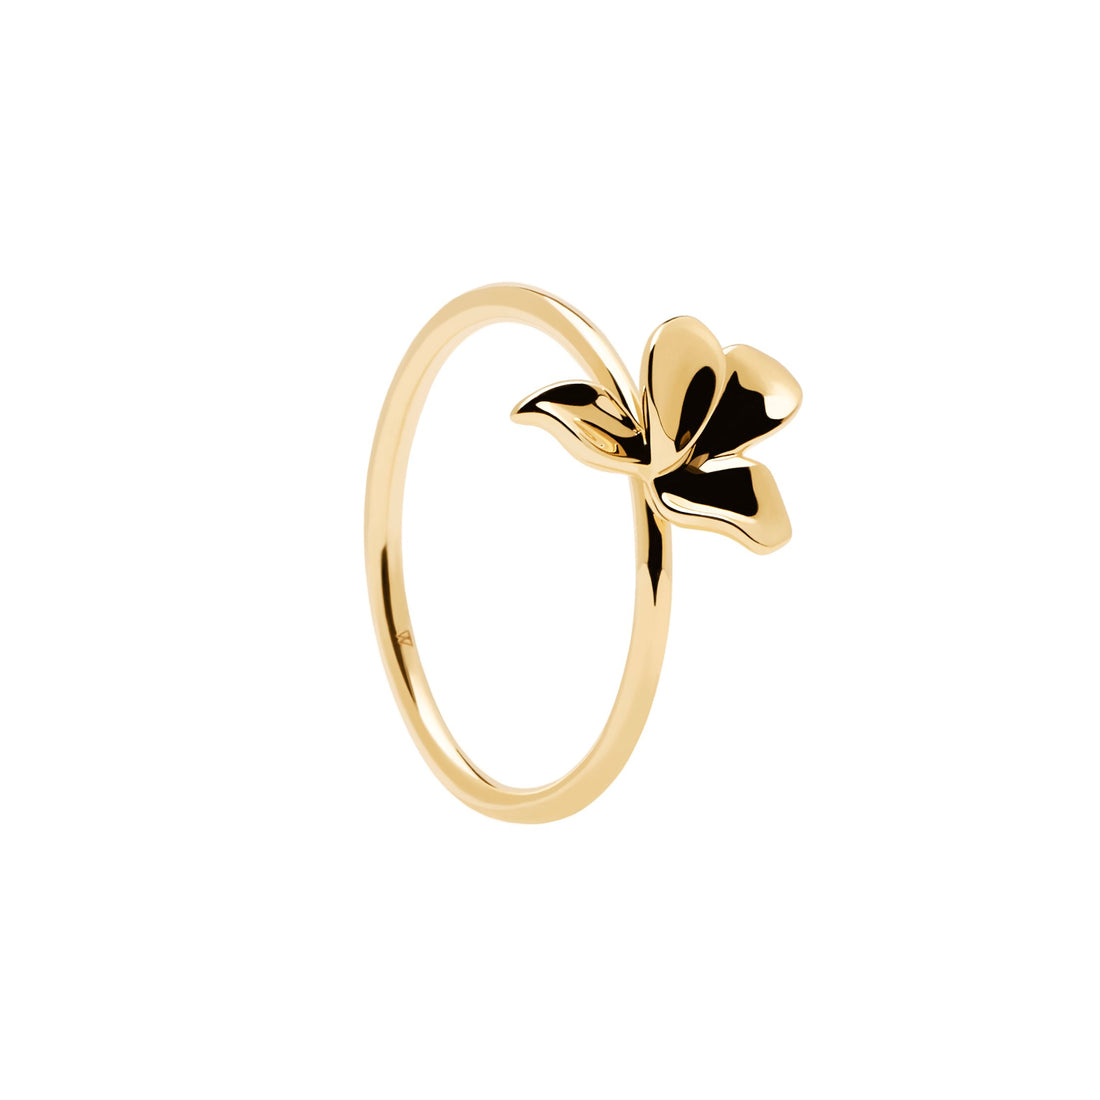 PD PAOLA NARCISE GOLD RING